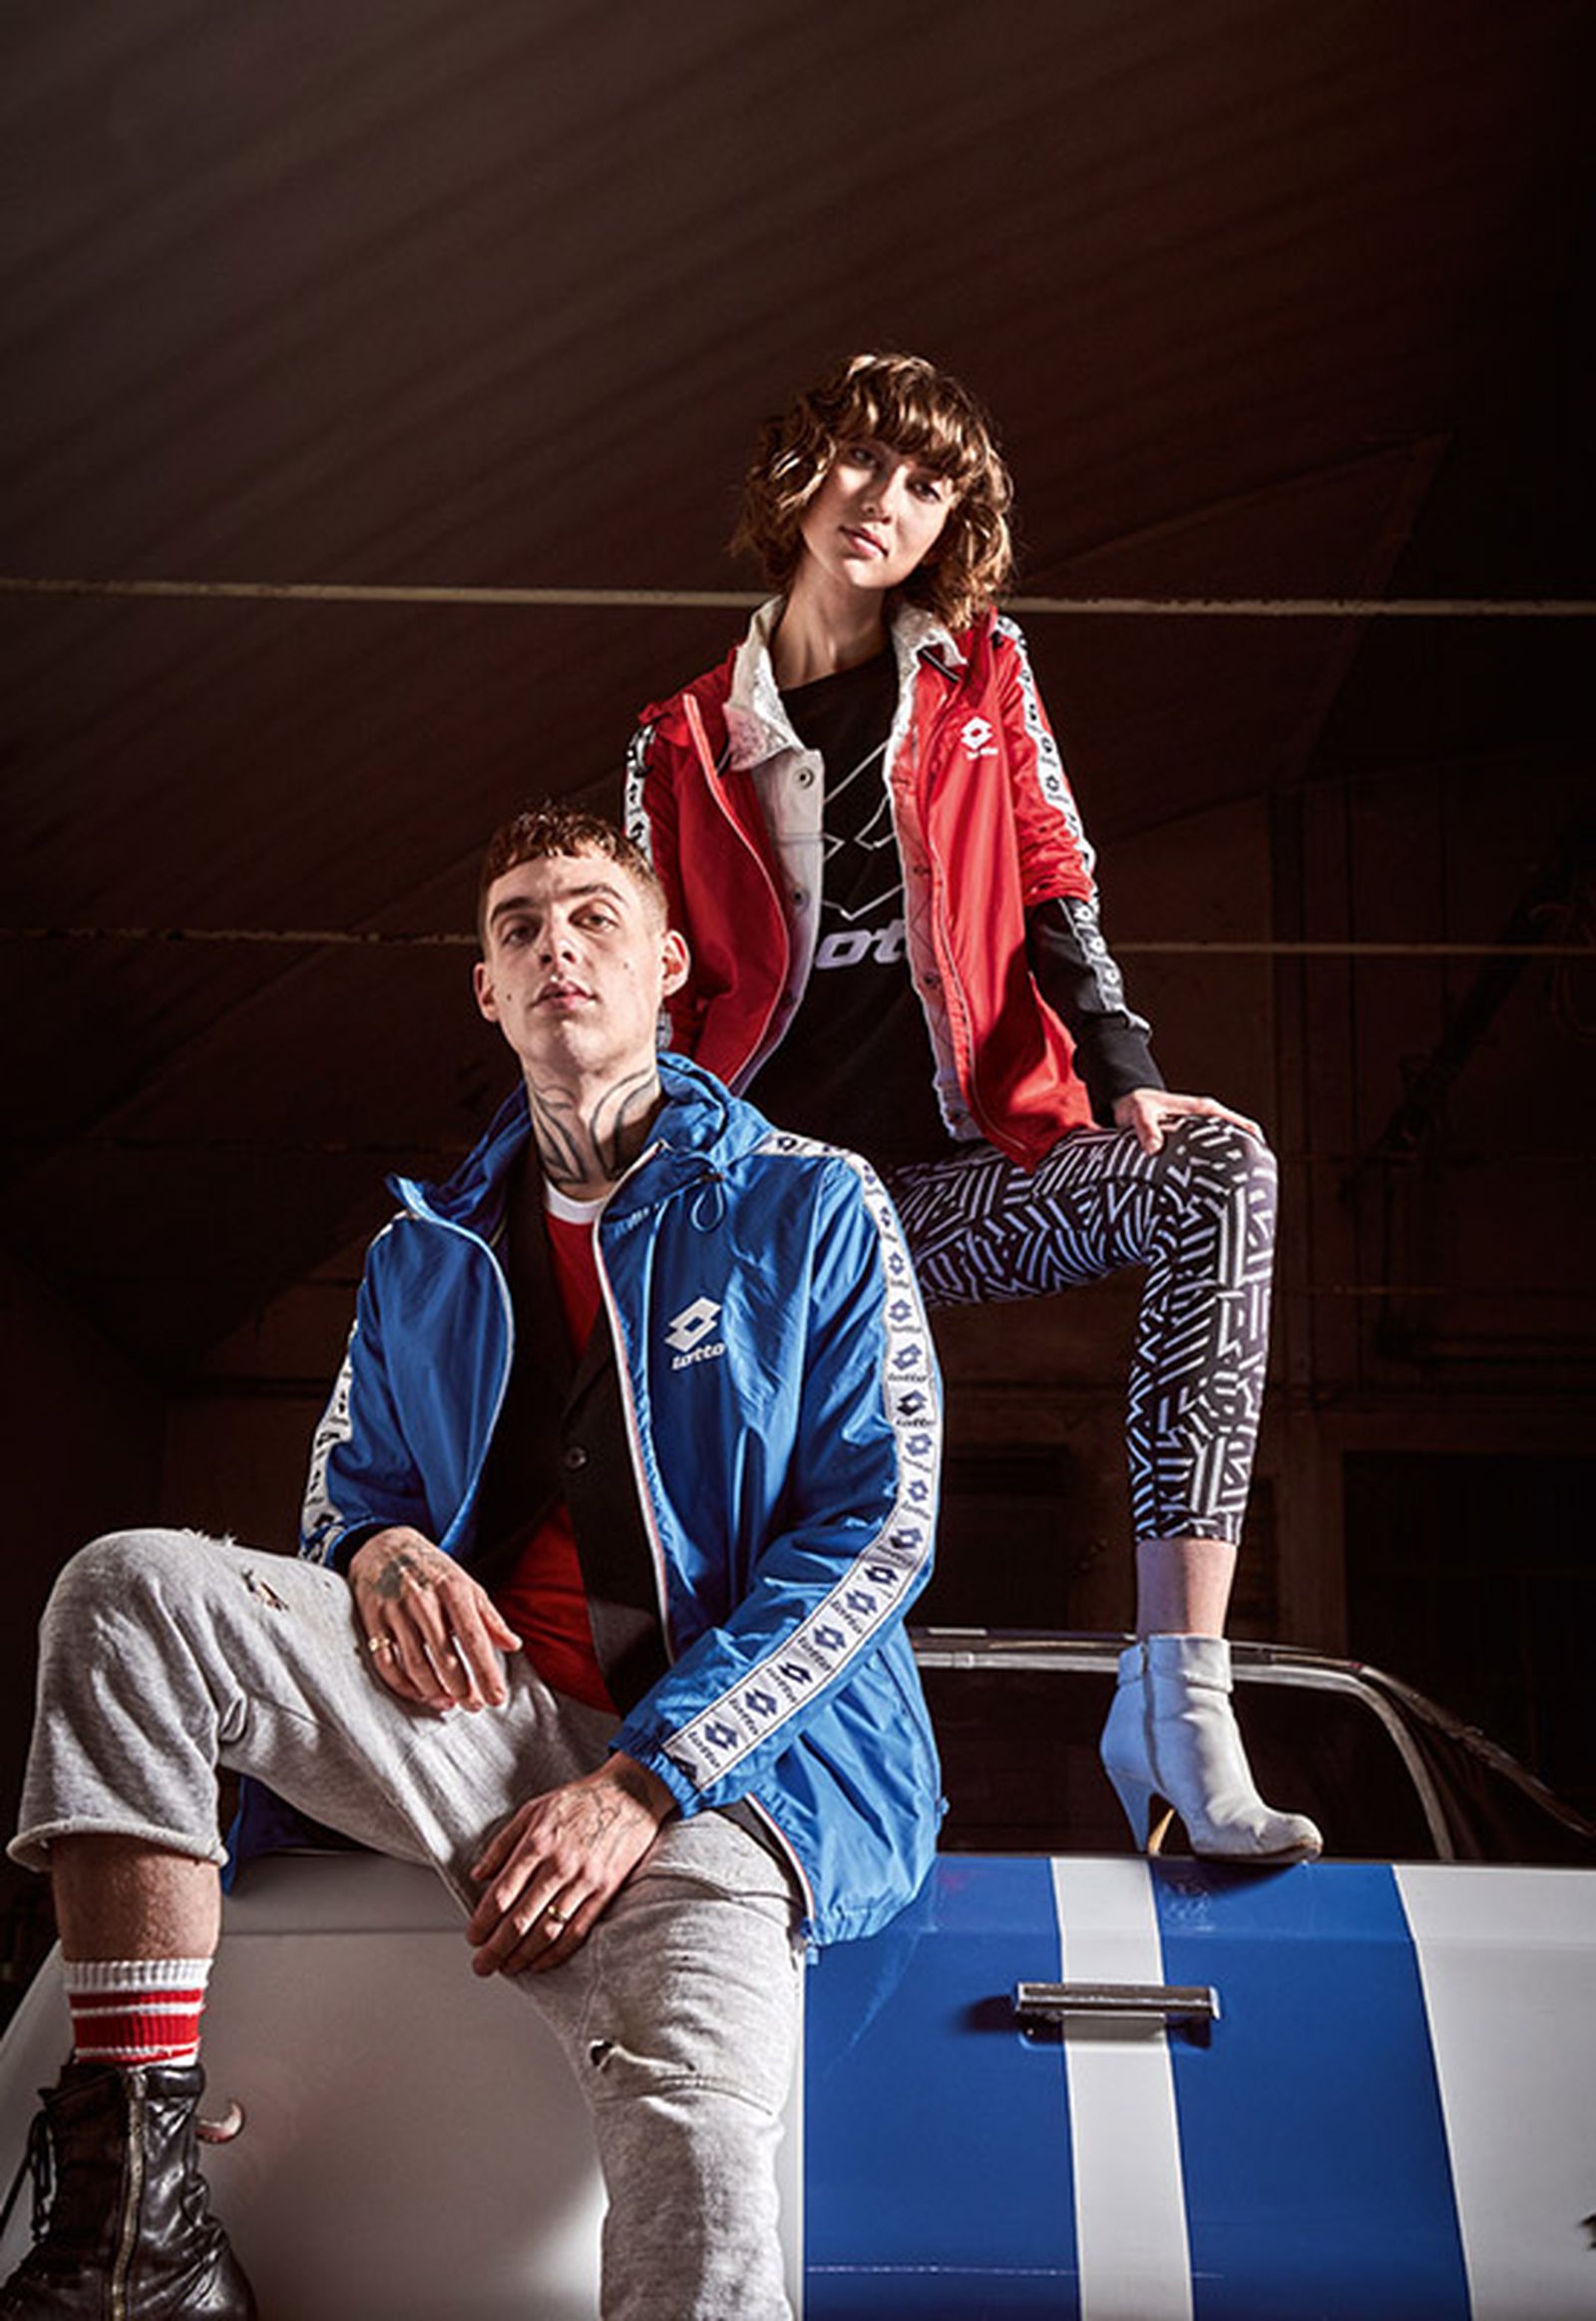 lotto fw18 athletica collection